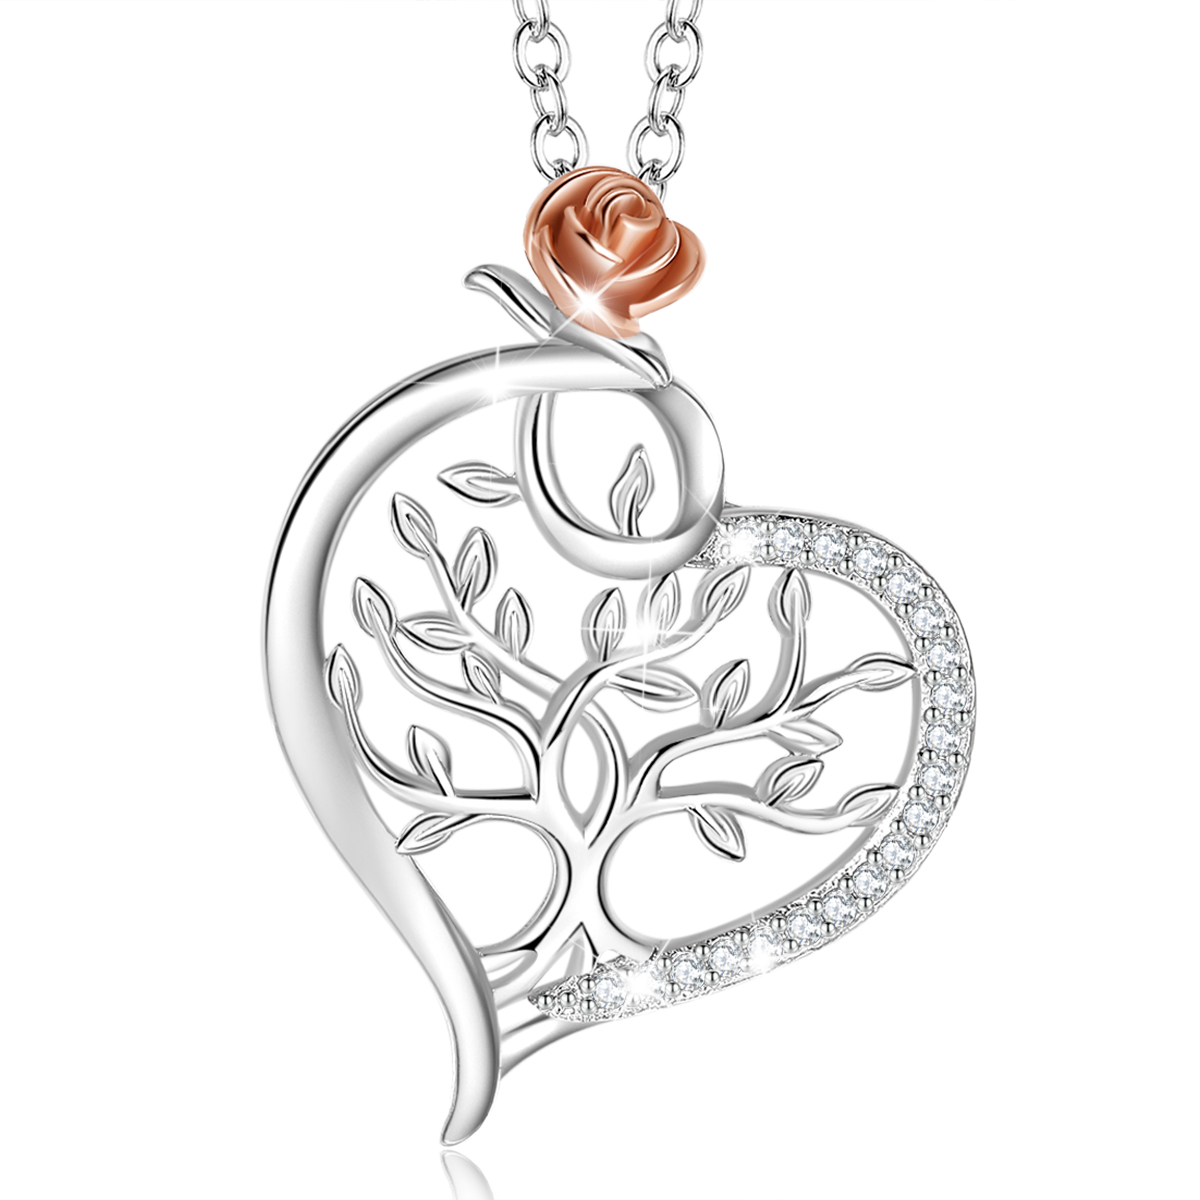 Merryshine Jewelry S925 Sterling Silver Plating White Gold Tree of Life Pendant Necklace for Women